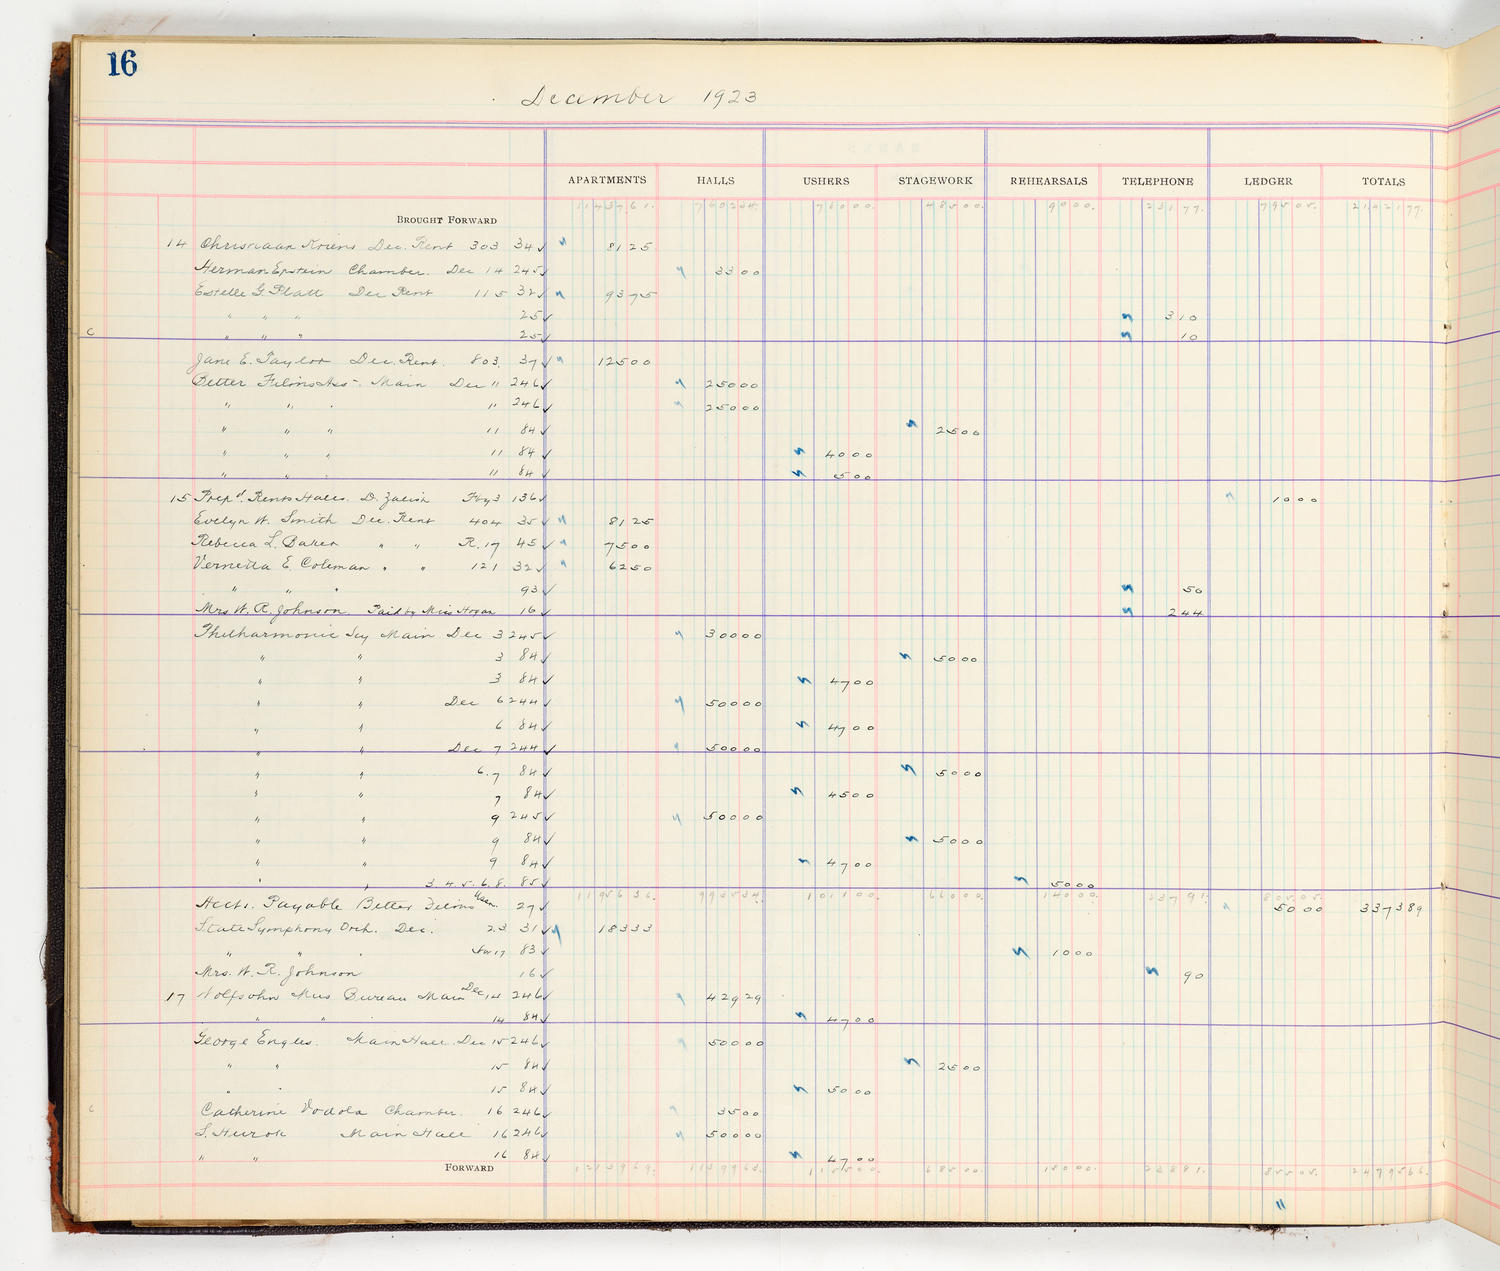 Music Hall Accounting Ledger Cash Book, volume 8, page 16a